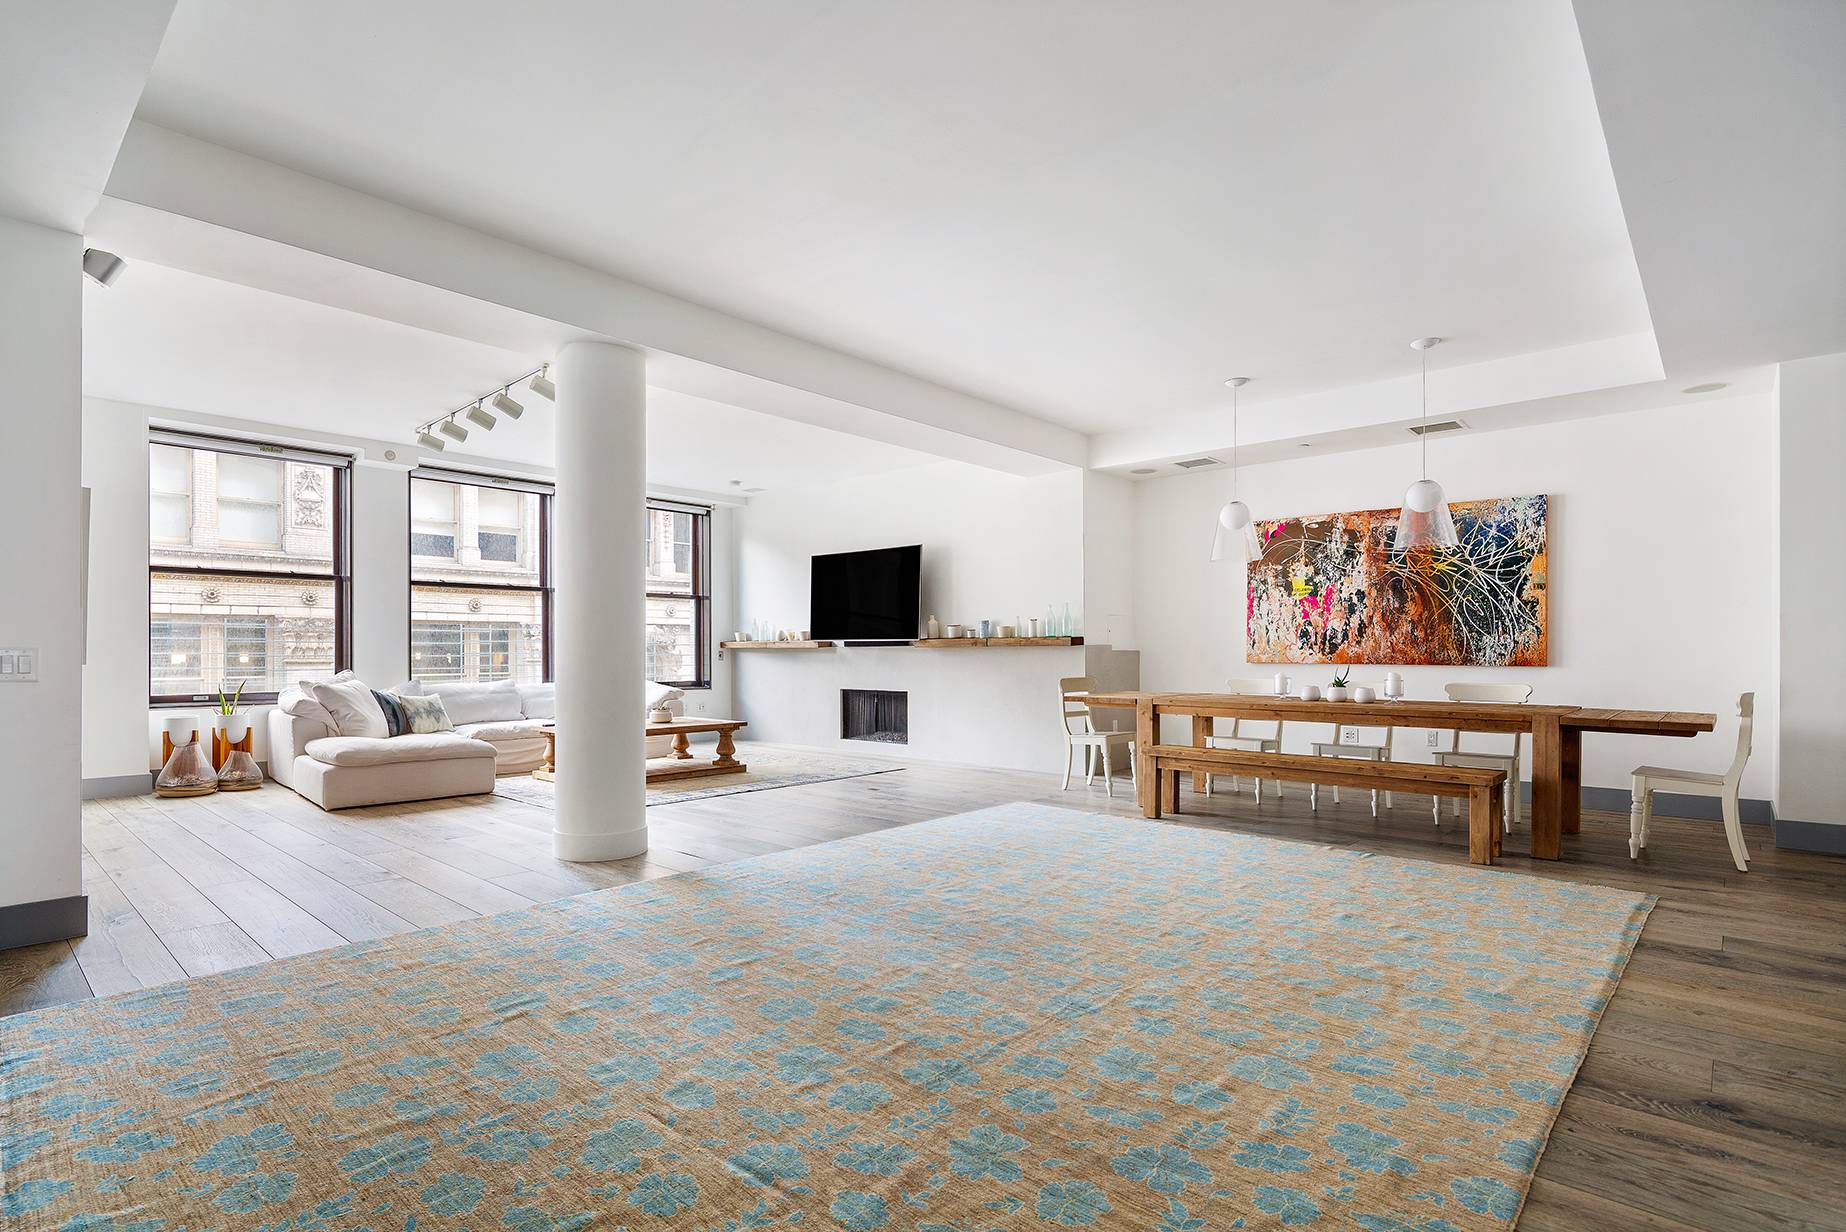 Beachy vibes meet NYC classic loft living in this gorgeous home at the nexus of Union Square, Flatiron and Chelsea.